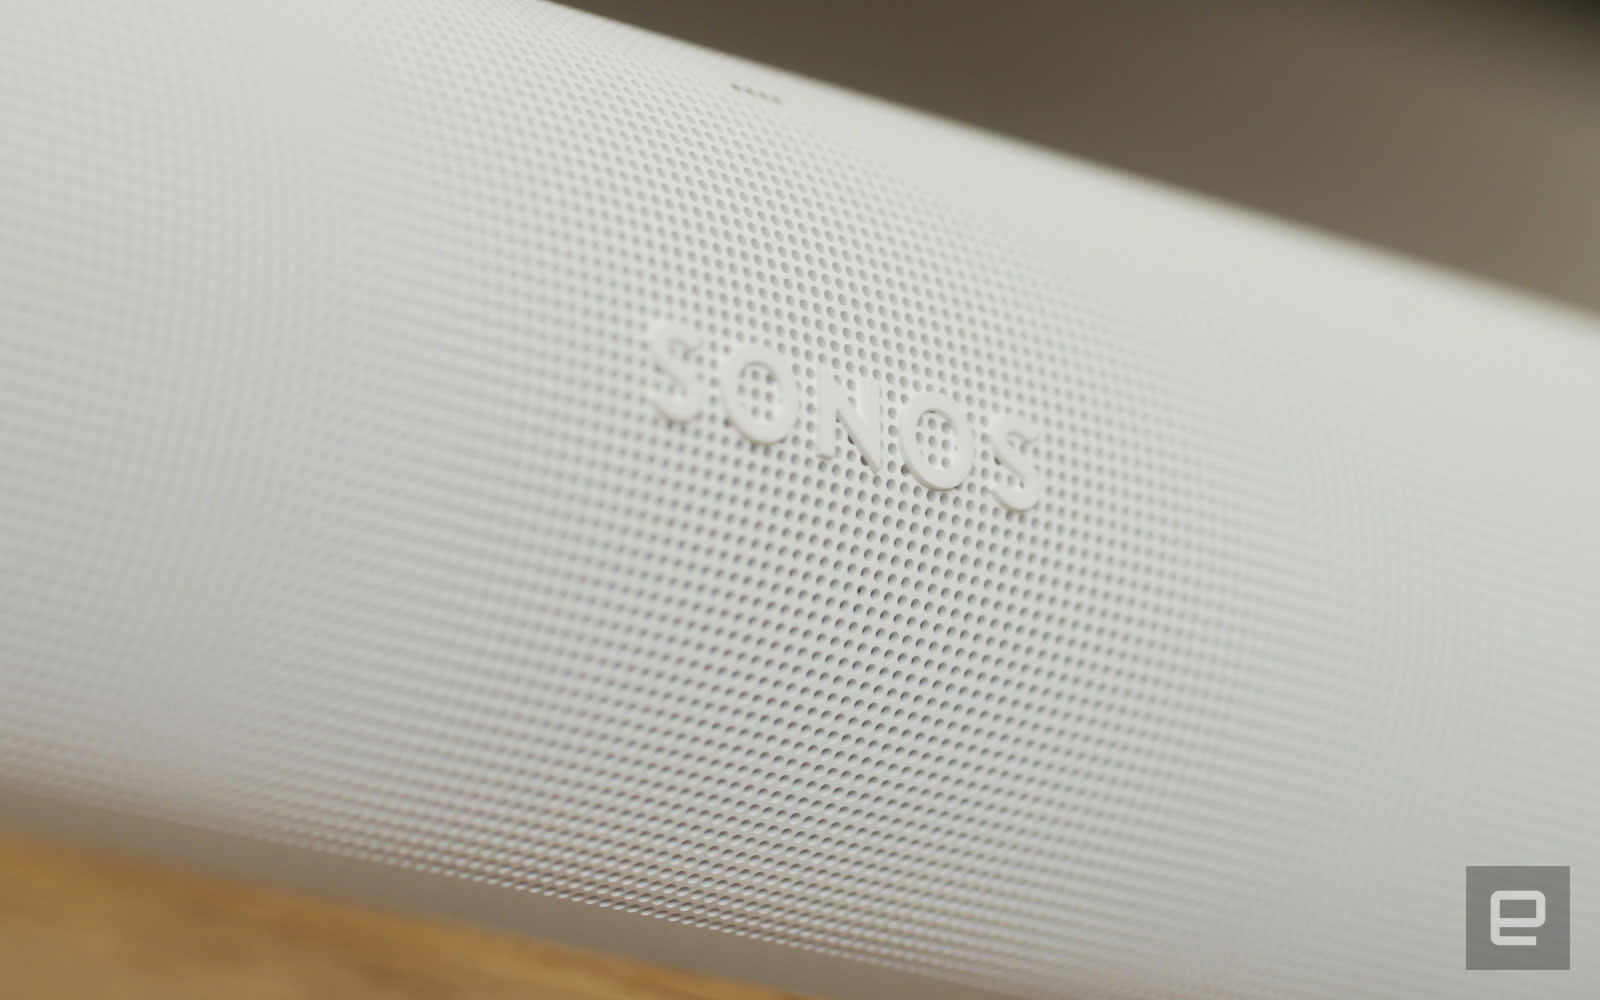 Sonos’ next portable speaker will reportedly cost $ 169